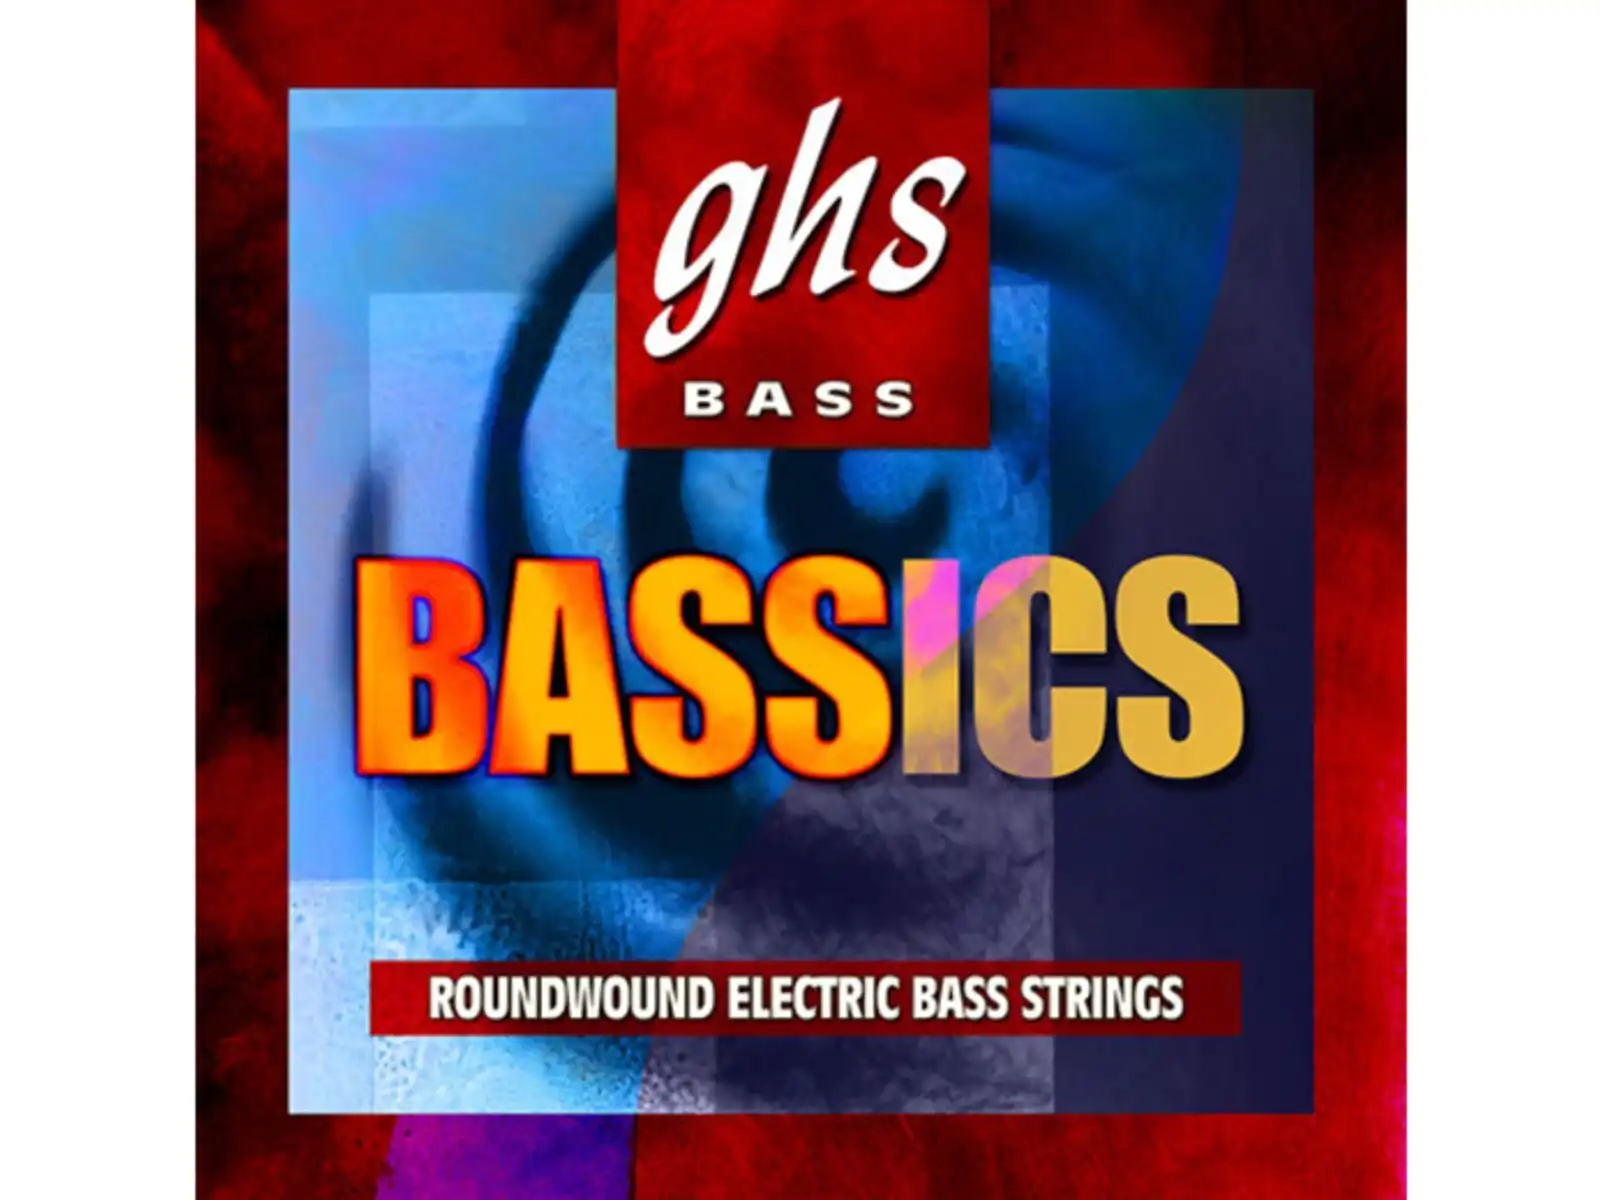 GHS M6000-5 Bassics Nickel Plated Steel Round Wound Electric Bass Strings Long Scale - 5-String 44-130